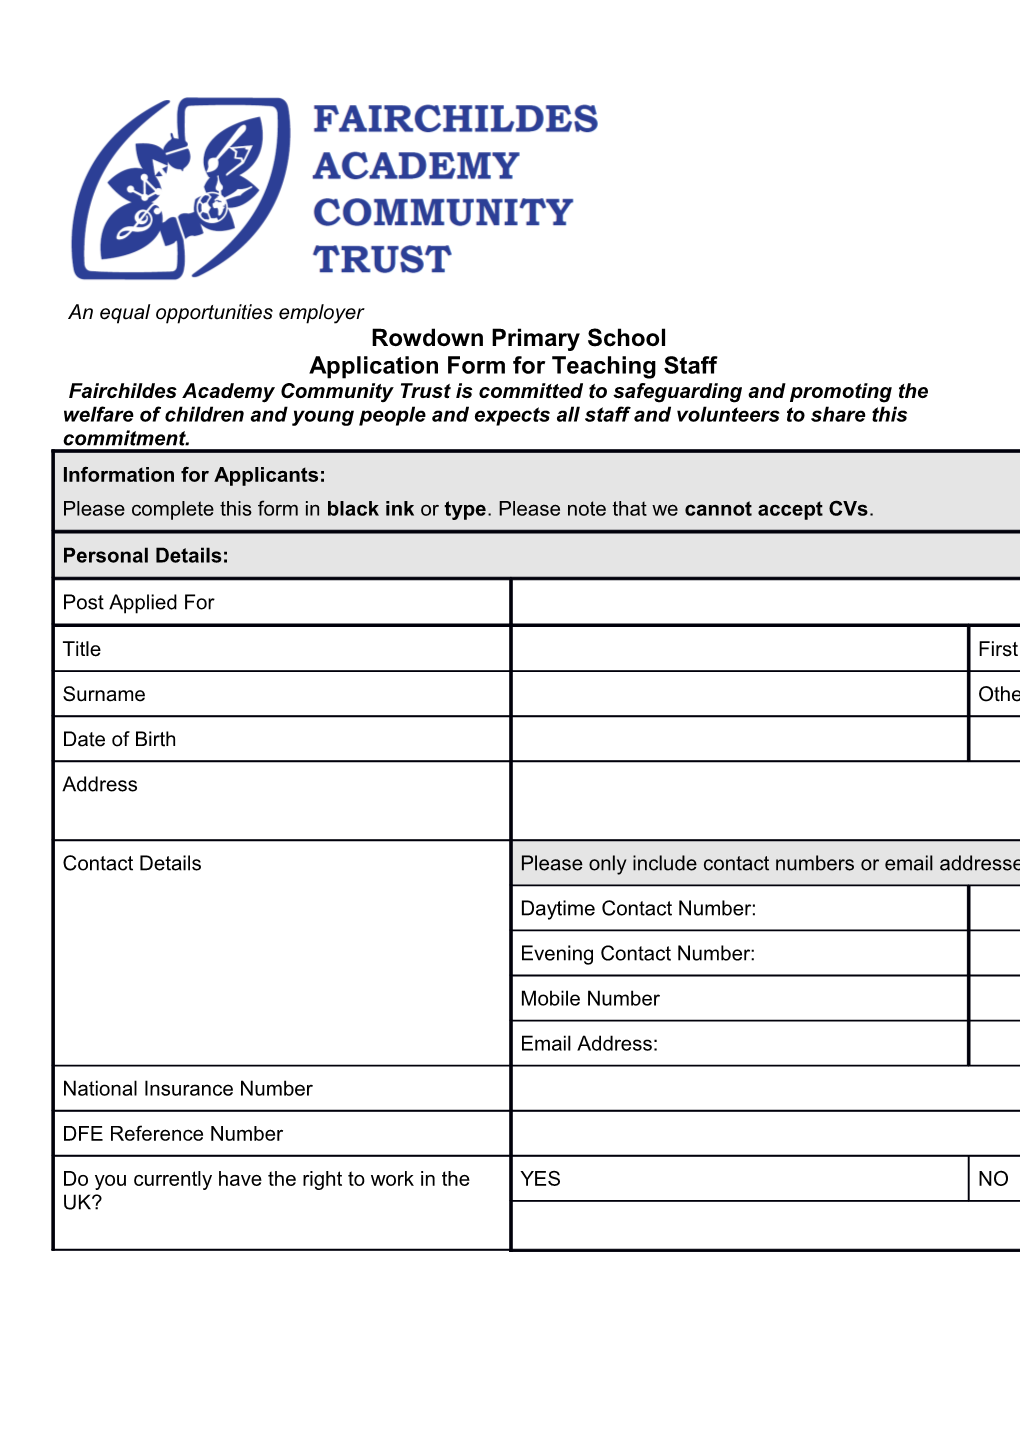 Application Form for Teaching Staff